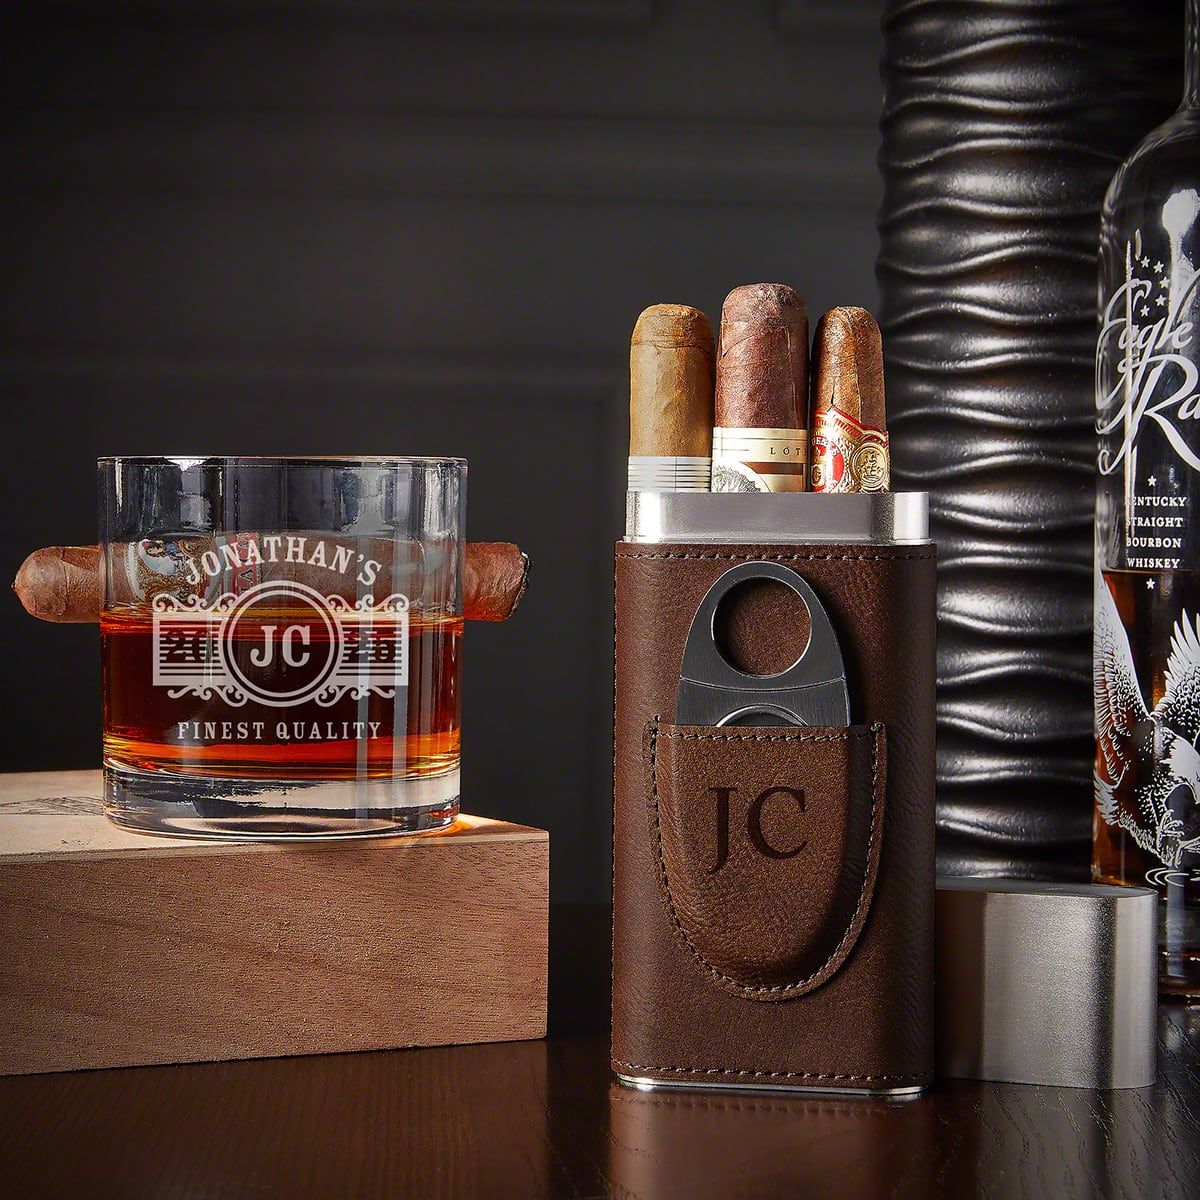 https://images.homewetbar.com/media/catalog/product/c/u/customized-cigar-whiskey-glass-cigar-case-marquee-p-10682.jpg?store=default&image-type=image